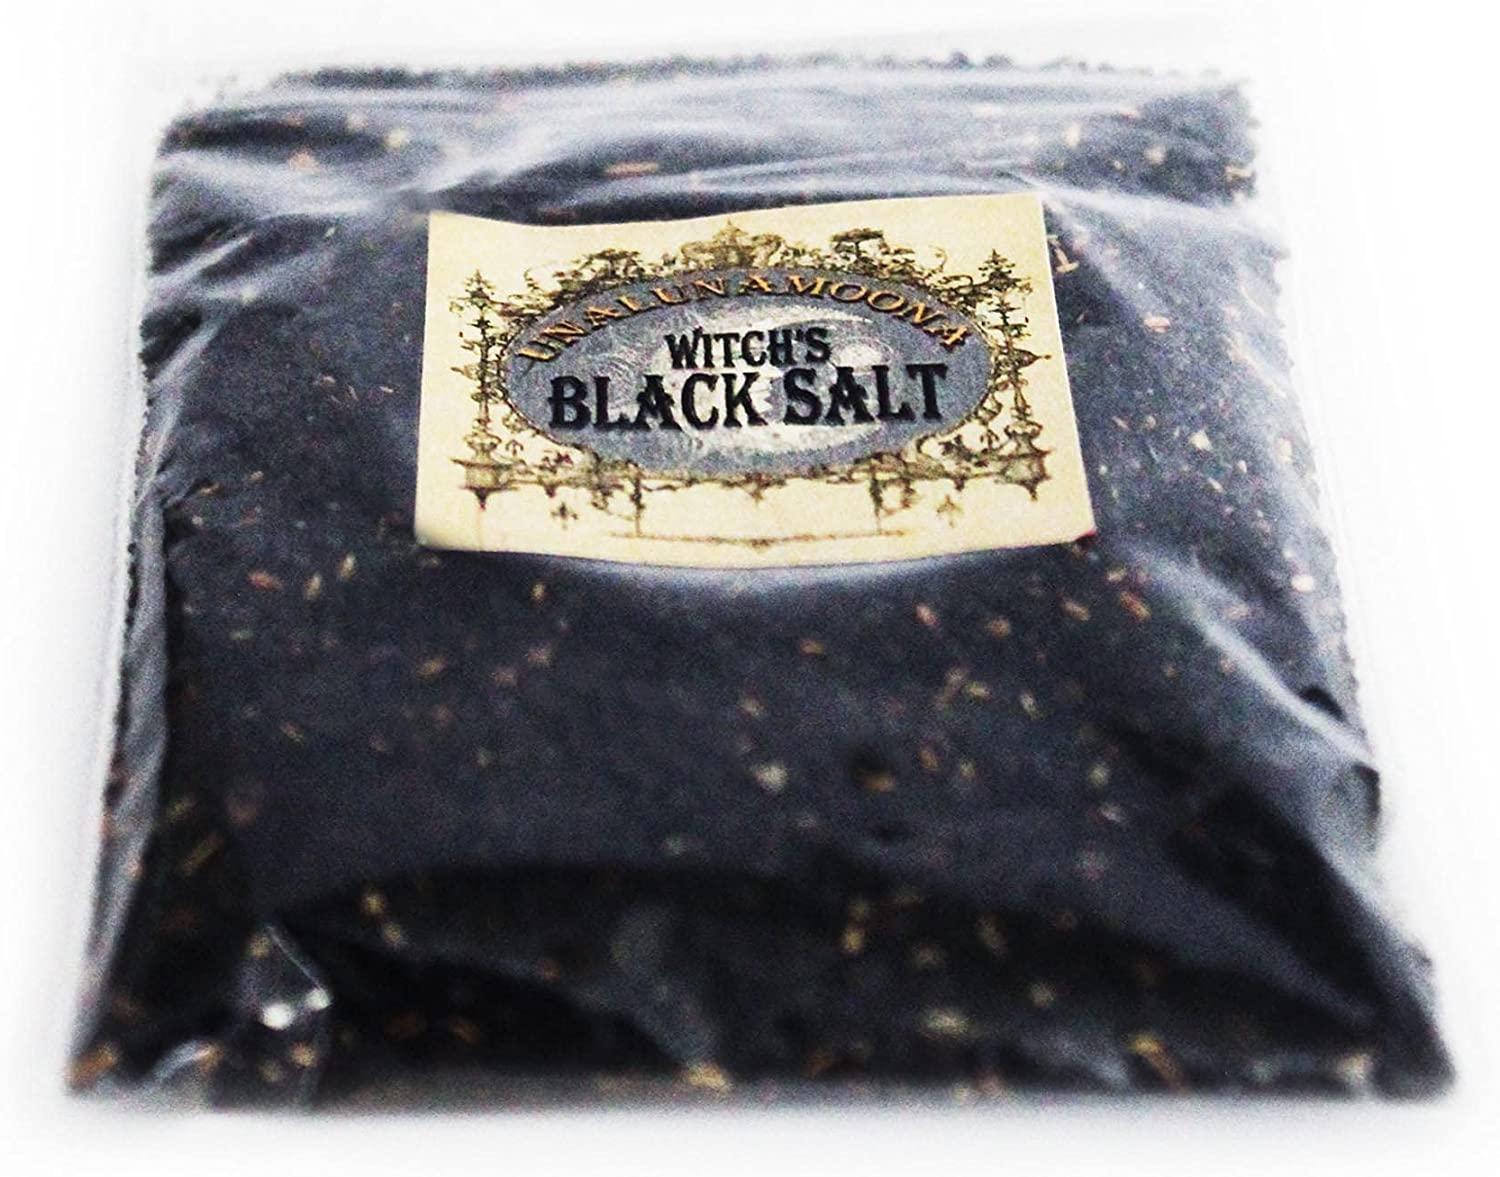  Black Salt for Protection Rituals, Wiccan Supplies, Sal Negra  para Rituales de Brujeria (2 oz Bag) - Witches & Wiccan Witchcraft Supplies  : Grocery & Gourmet Food